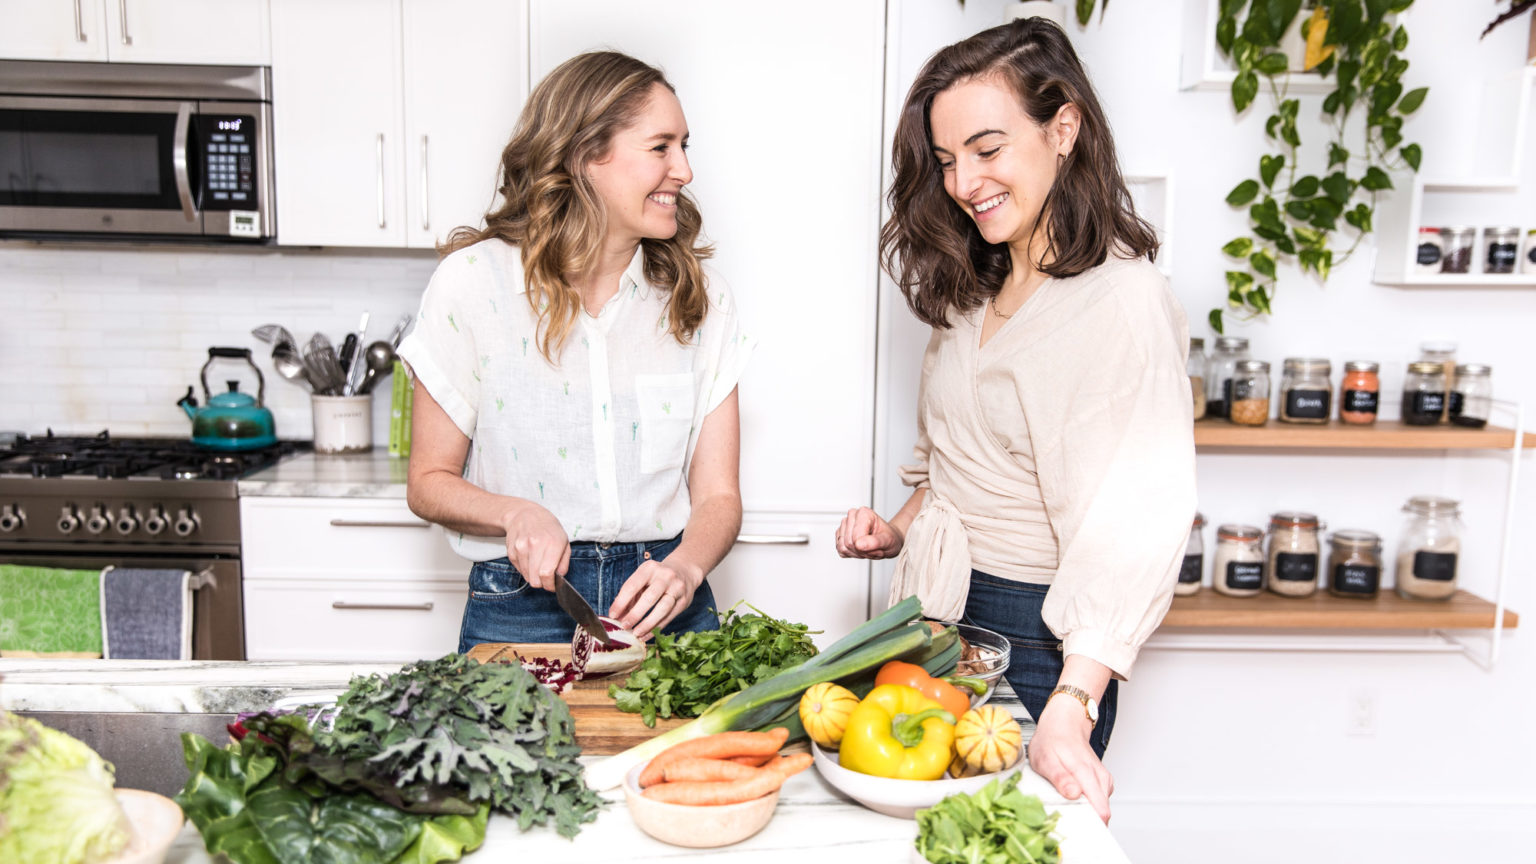 At Home Private Cooking Classes in New York City Phoebe Lapine